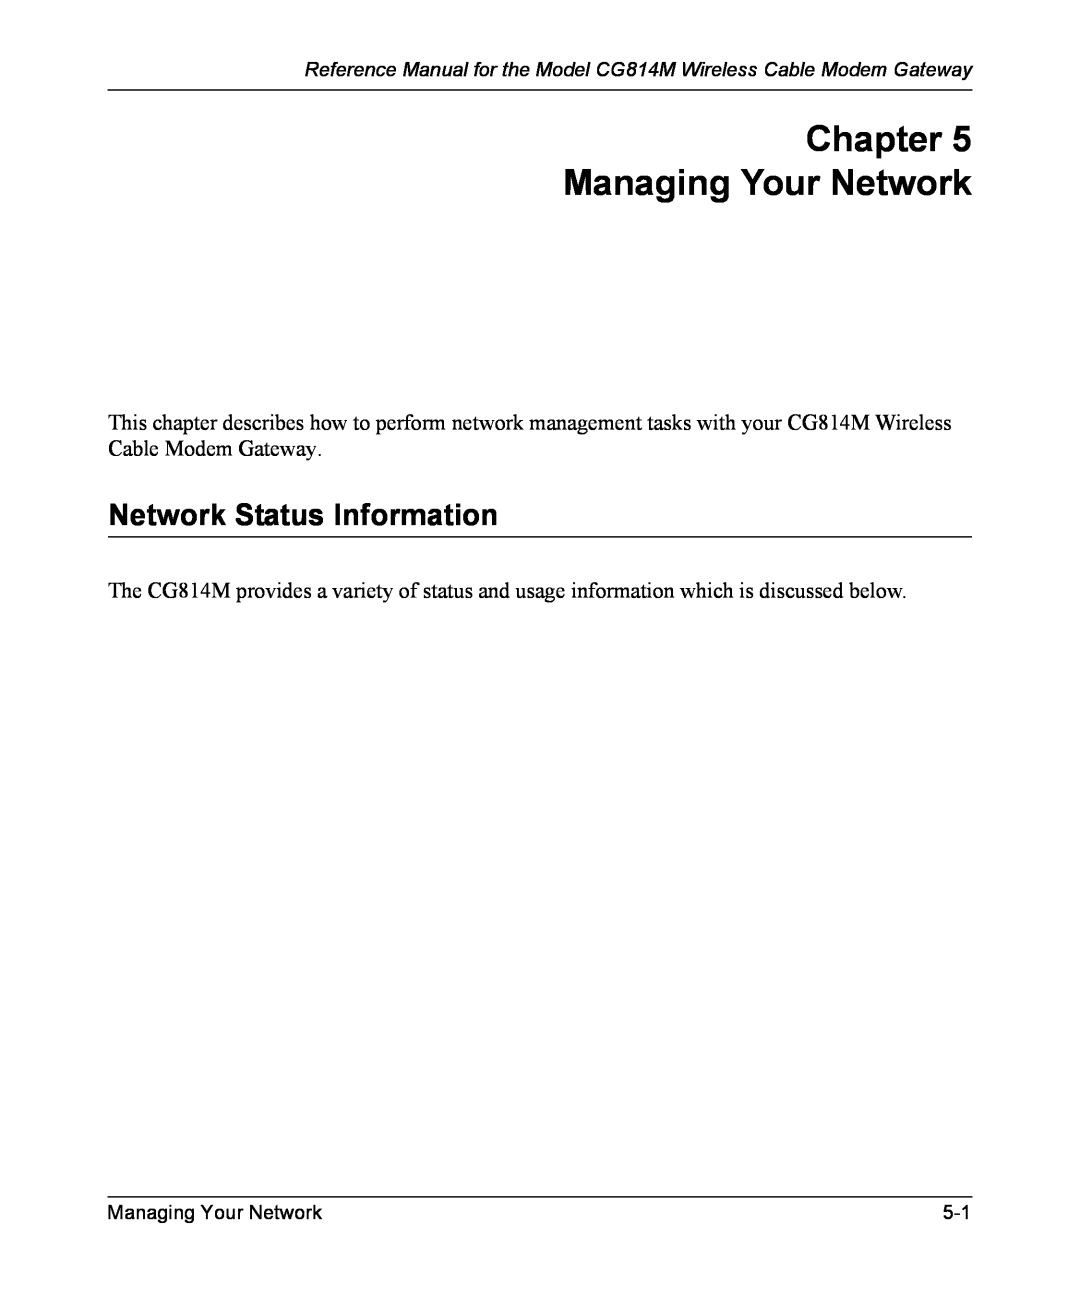 NETGEAR CG814M manual Chapter Managing Your Network, Network Status Information 